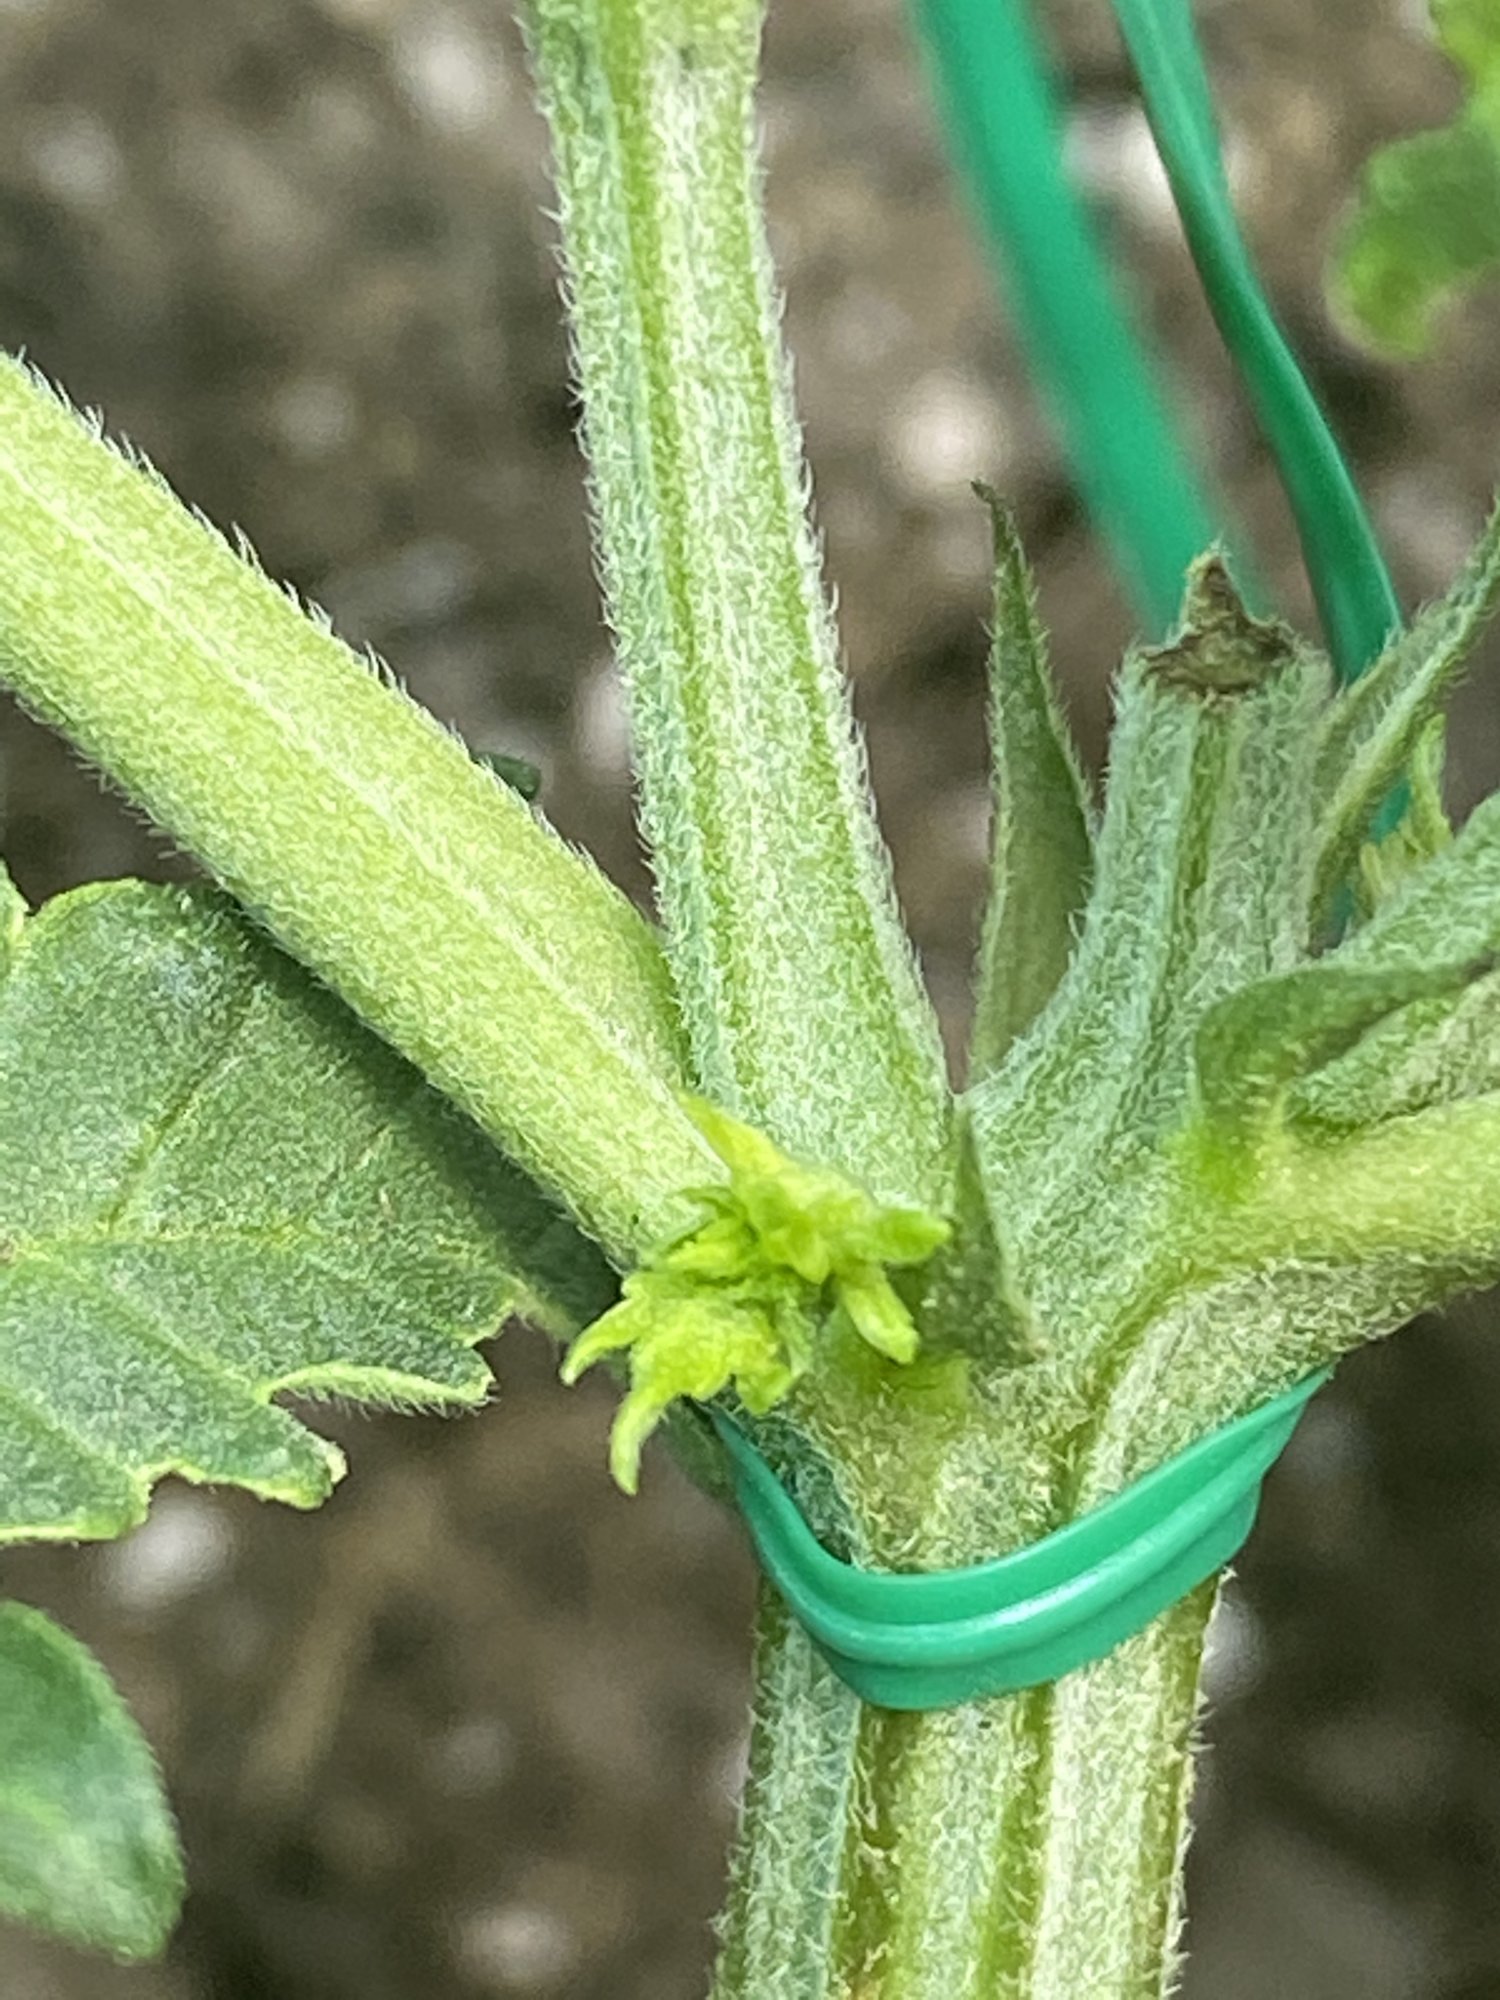 Node growing at sex site of plant